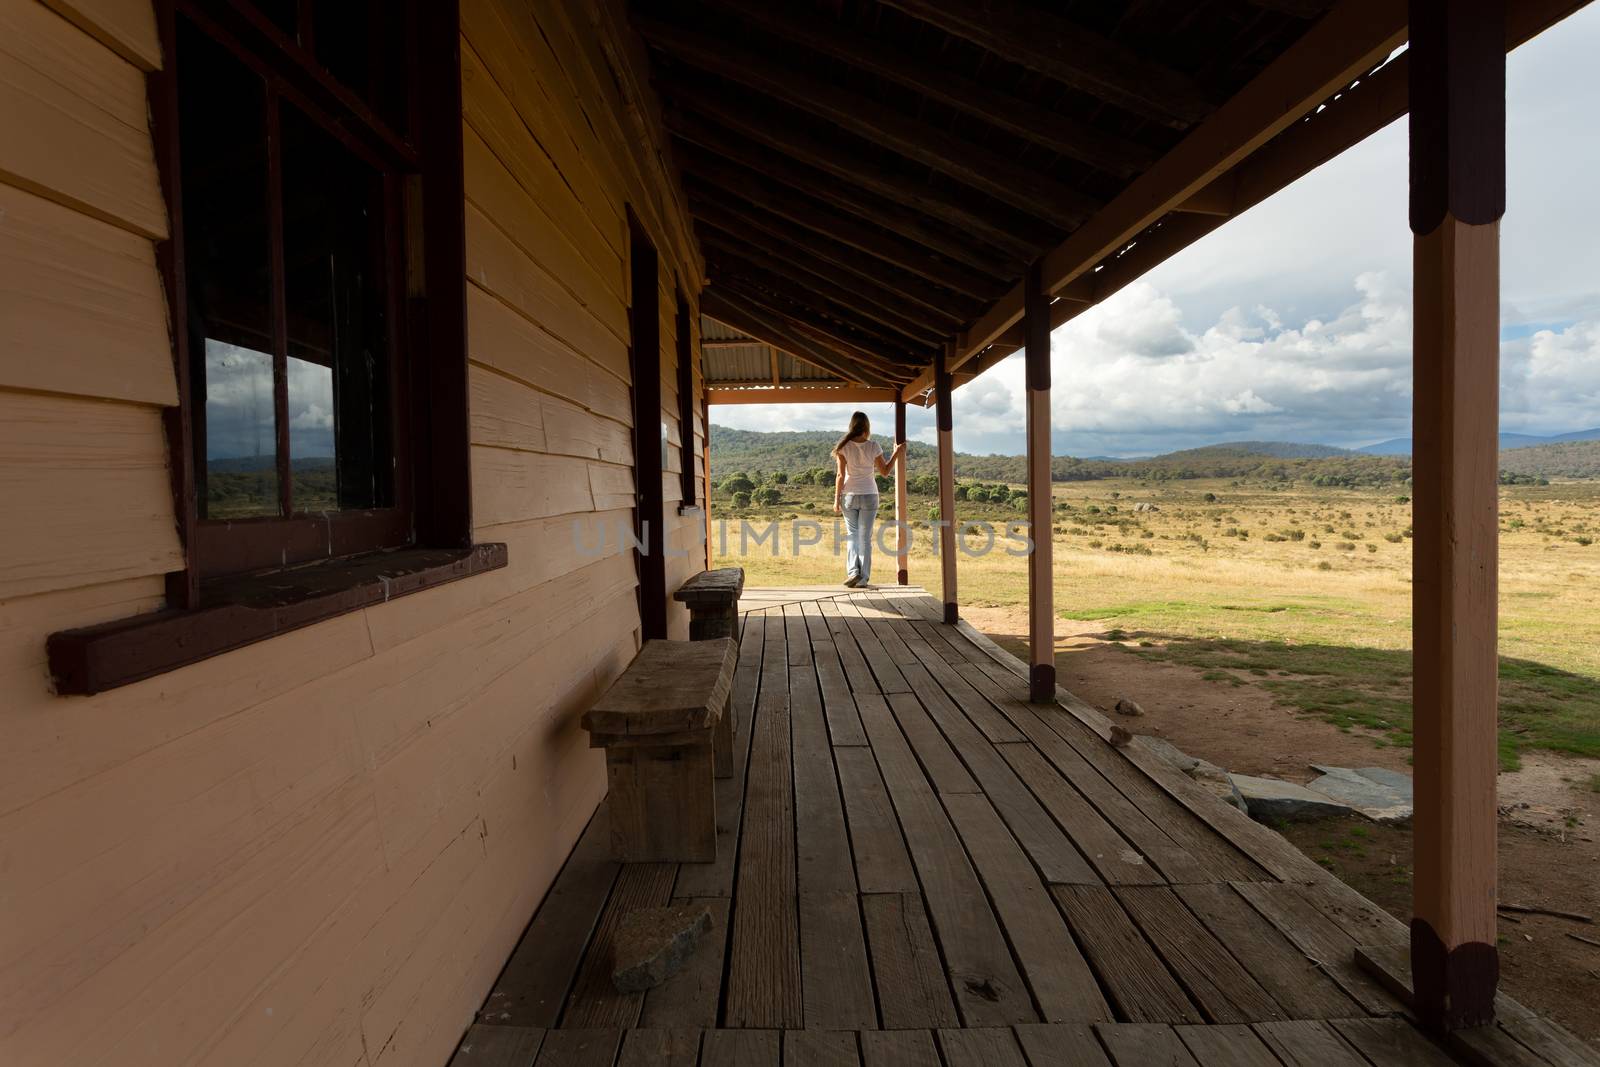 Woman standing on verandah of rural timber homestead in snowy high plains by lovleah